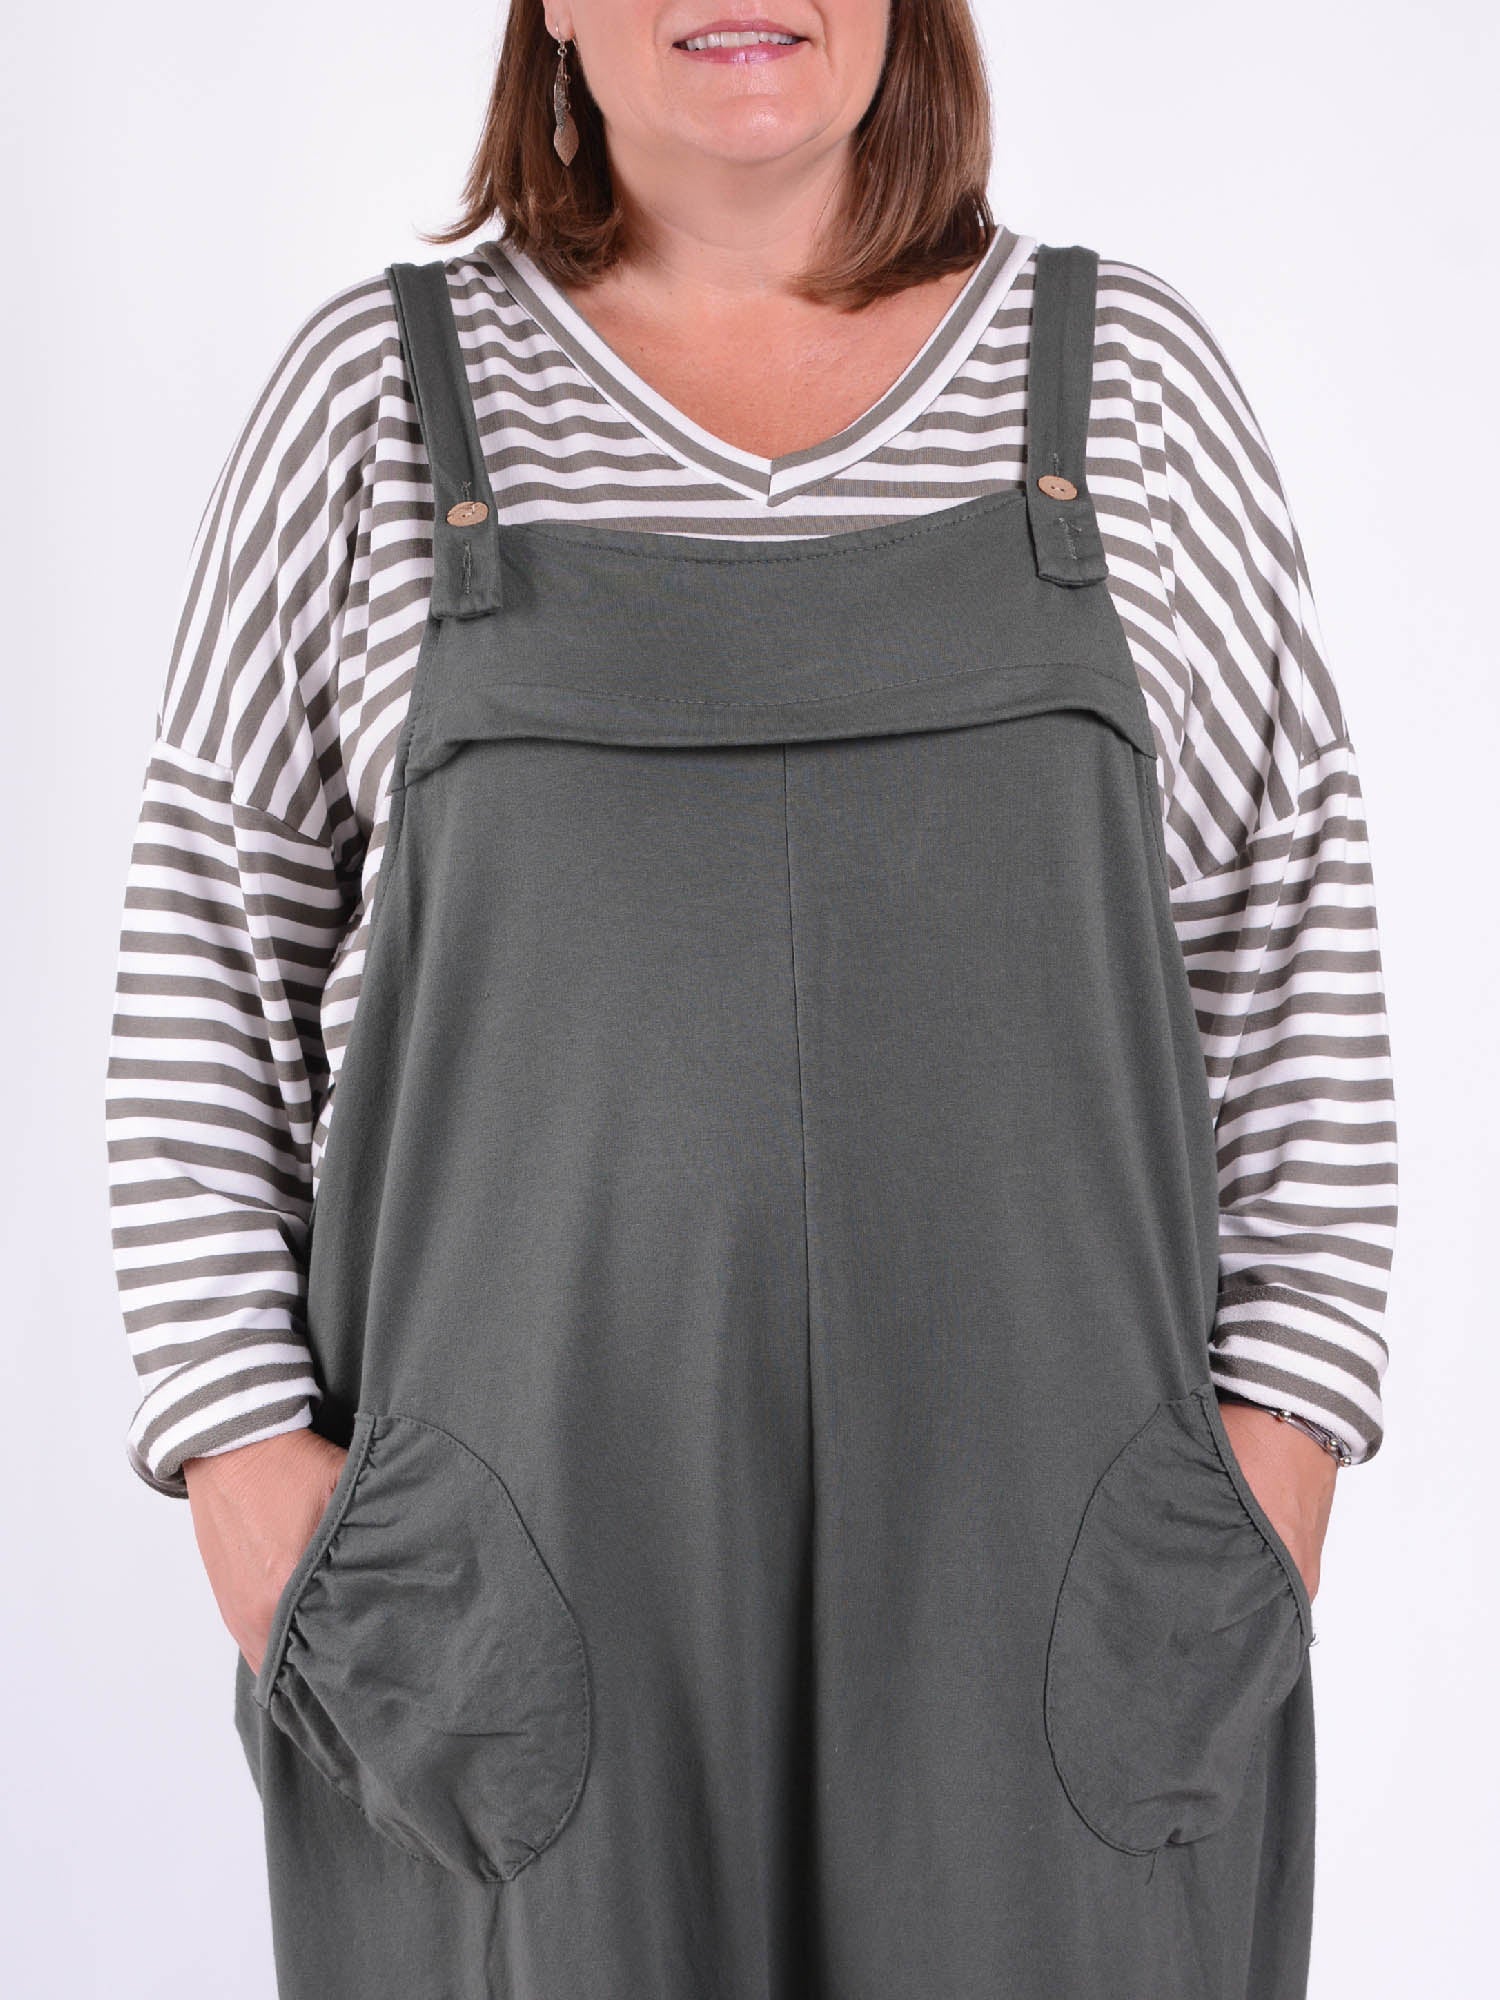 Lagenlook Cotton Dungarees - 8334/11905, Trousers, Pure Plus Clothing, Lagenlook Clothing, Plus Size Fashion, Over 50 Fashion